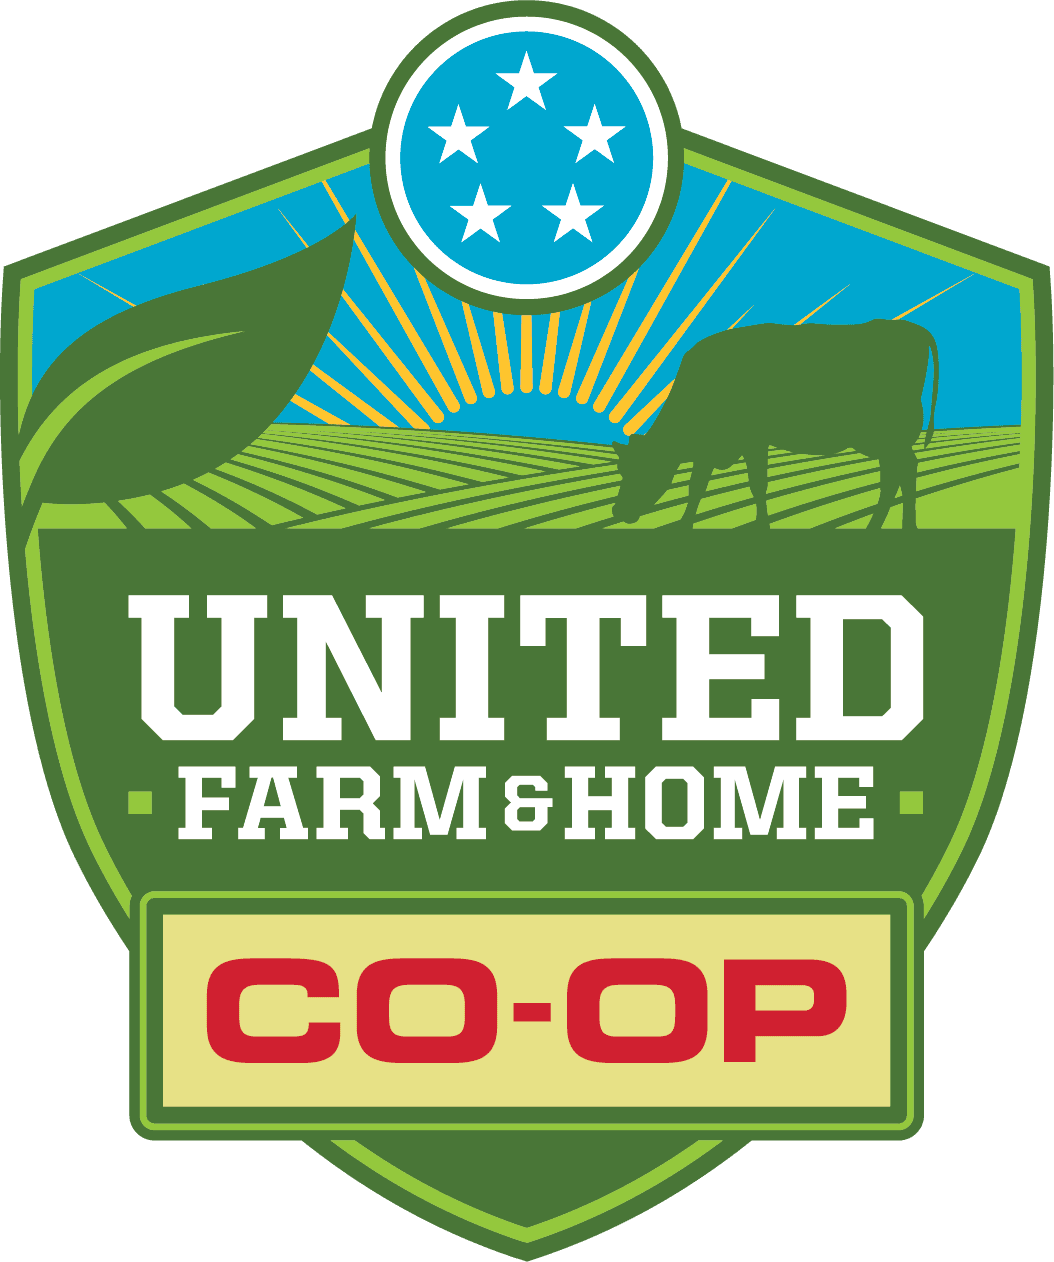 A logo of united farm and home co-op